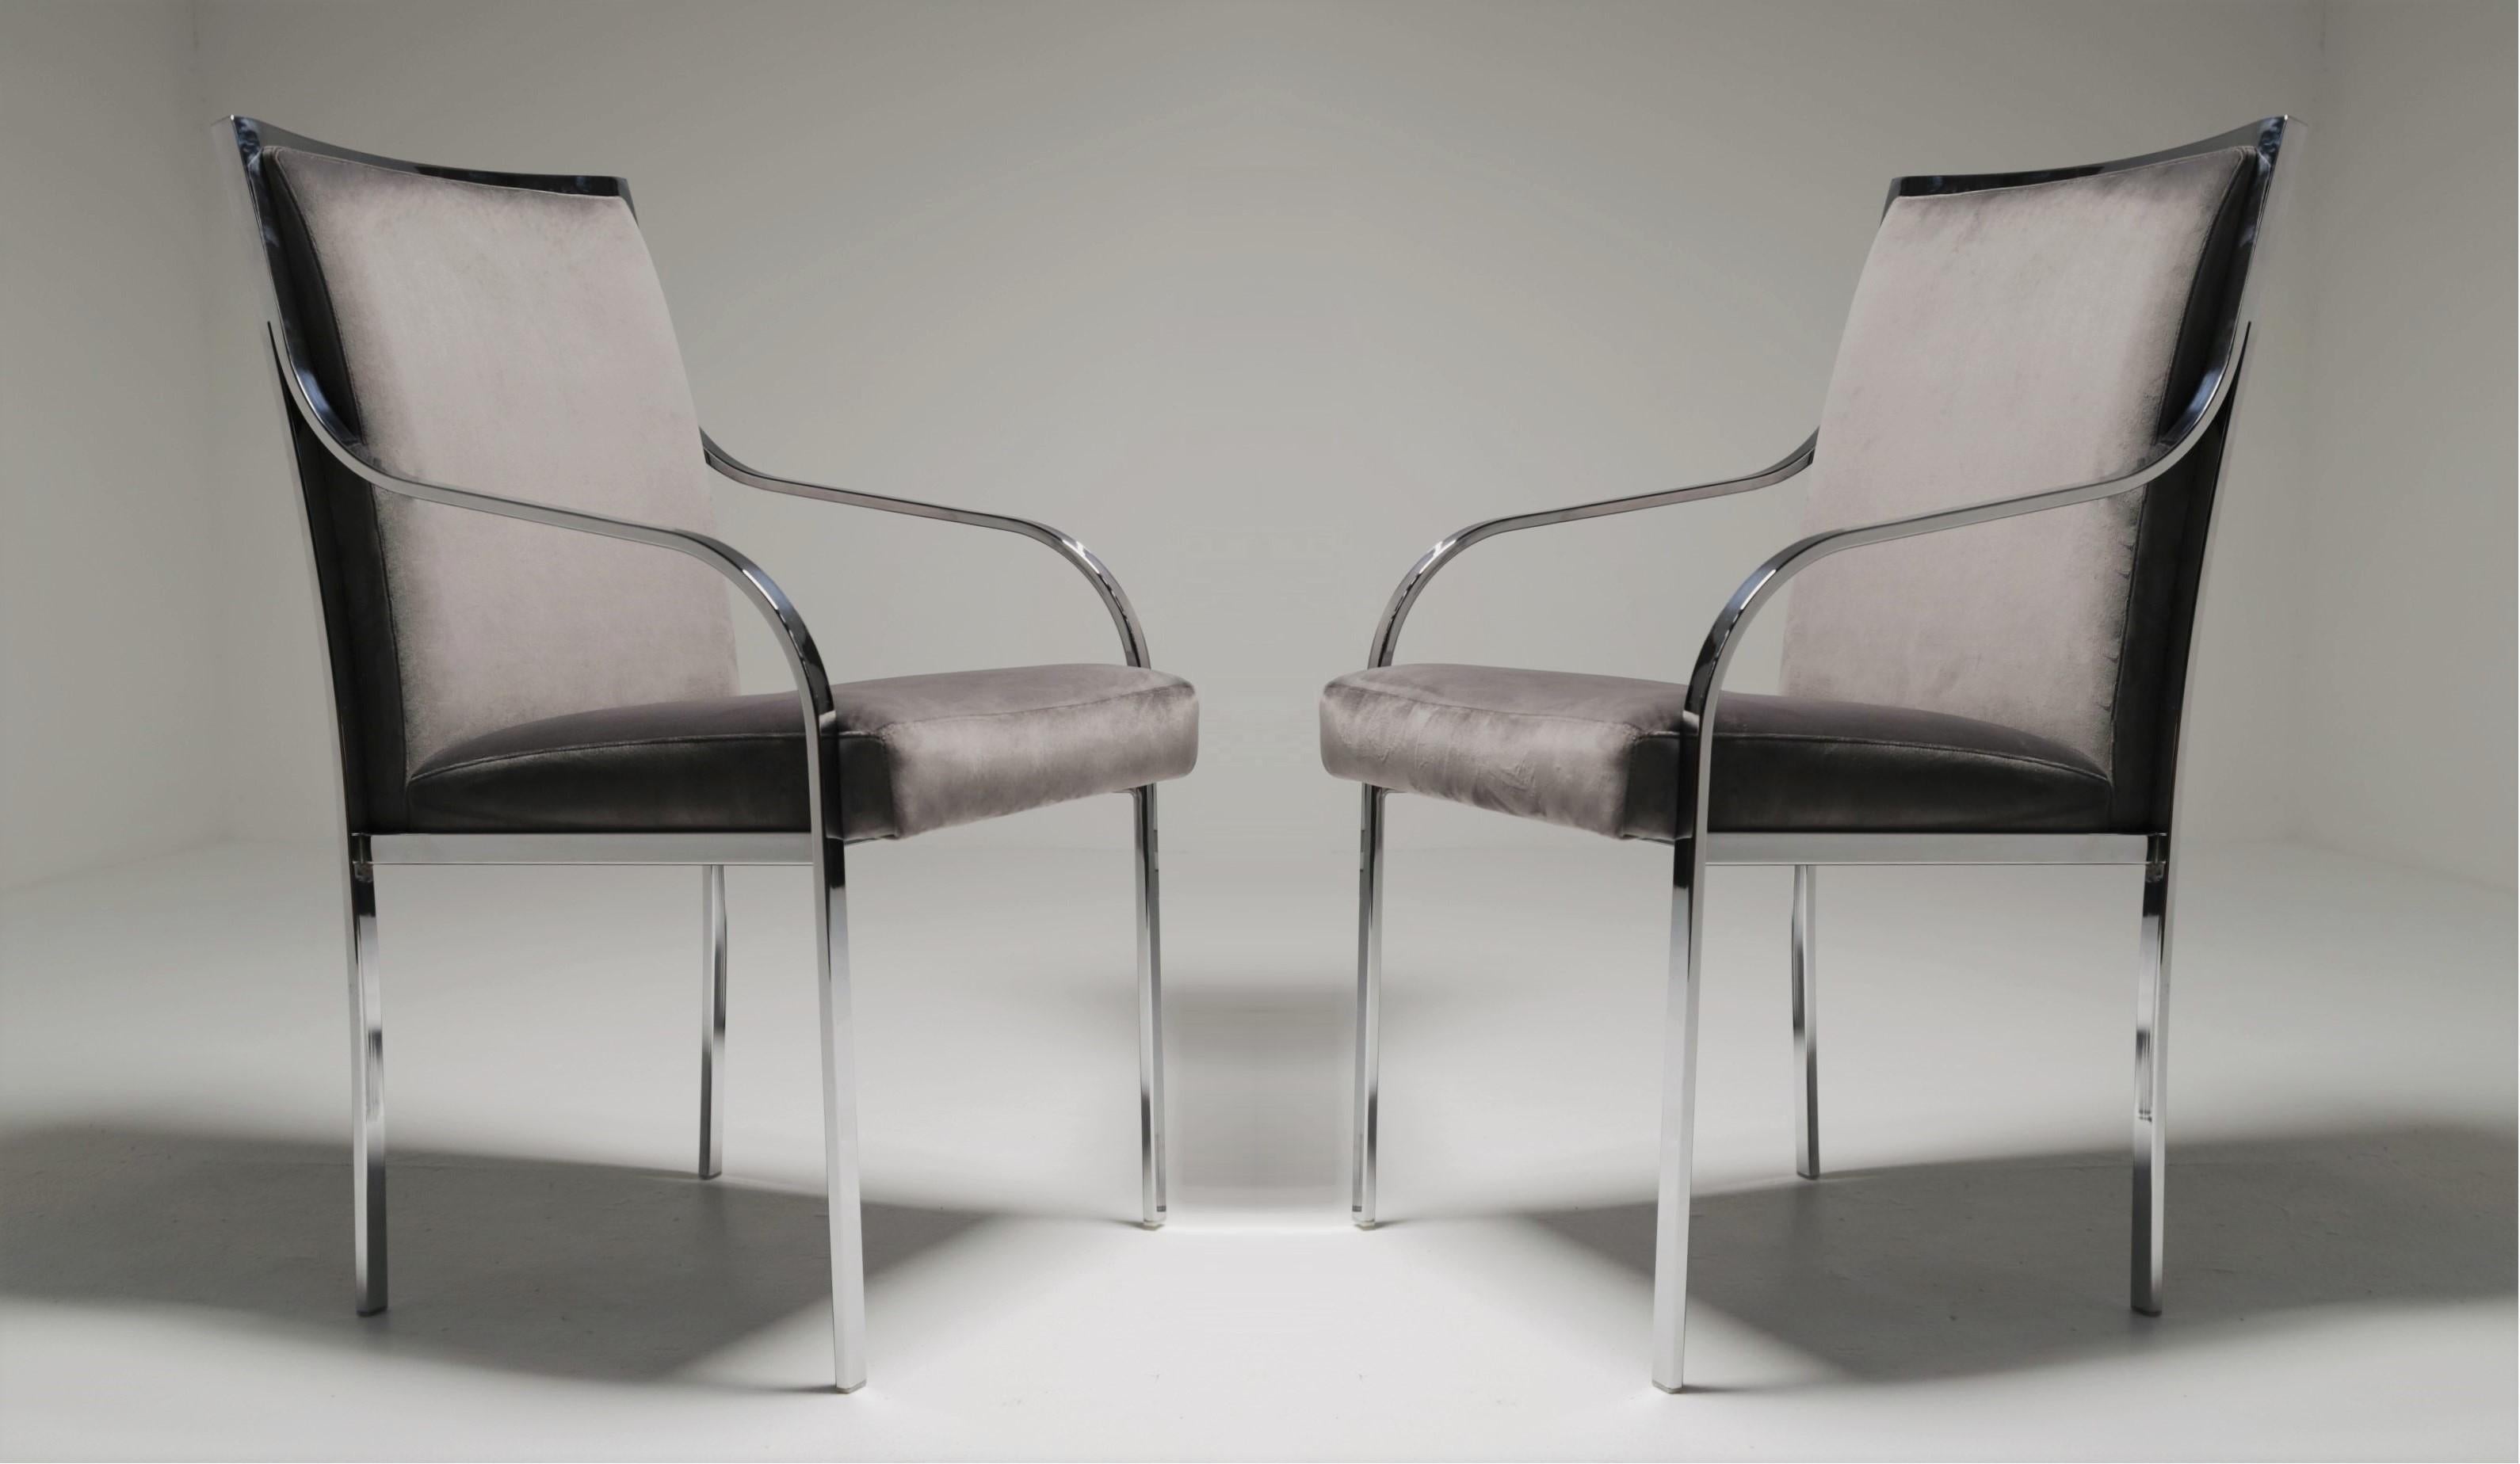 Set of six dining chairs designed by the French designer Pierre Cardin for Dillingham. The set includes two armchairs and four side chairs. Sleek midcentury chrome frames with shimmery beige velvet upholstery. Two armchairs have curved arm